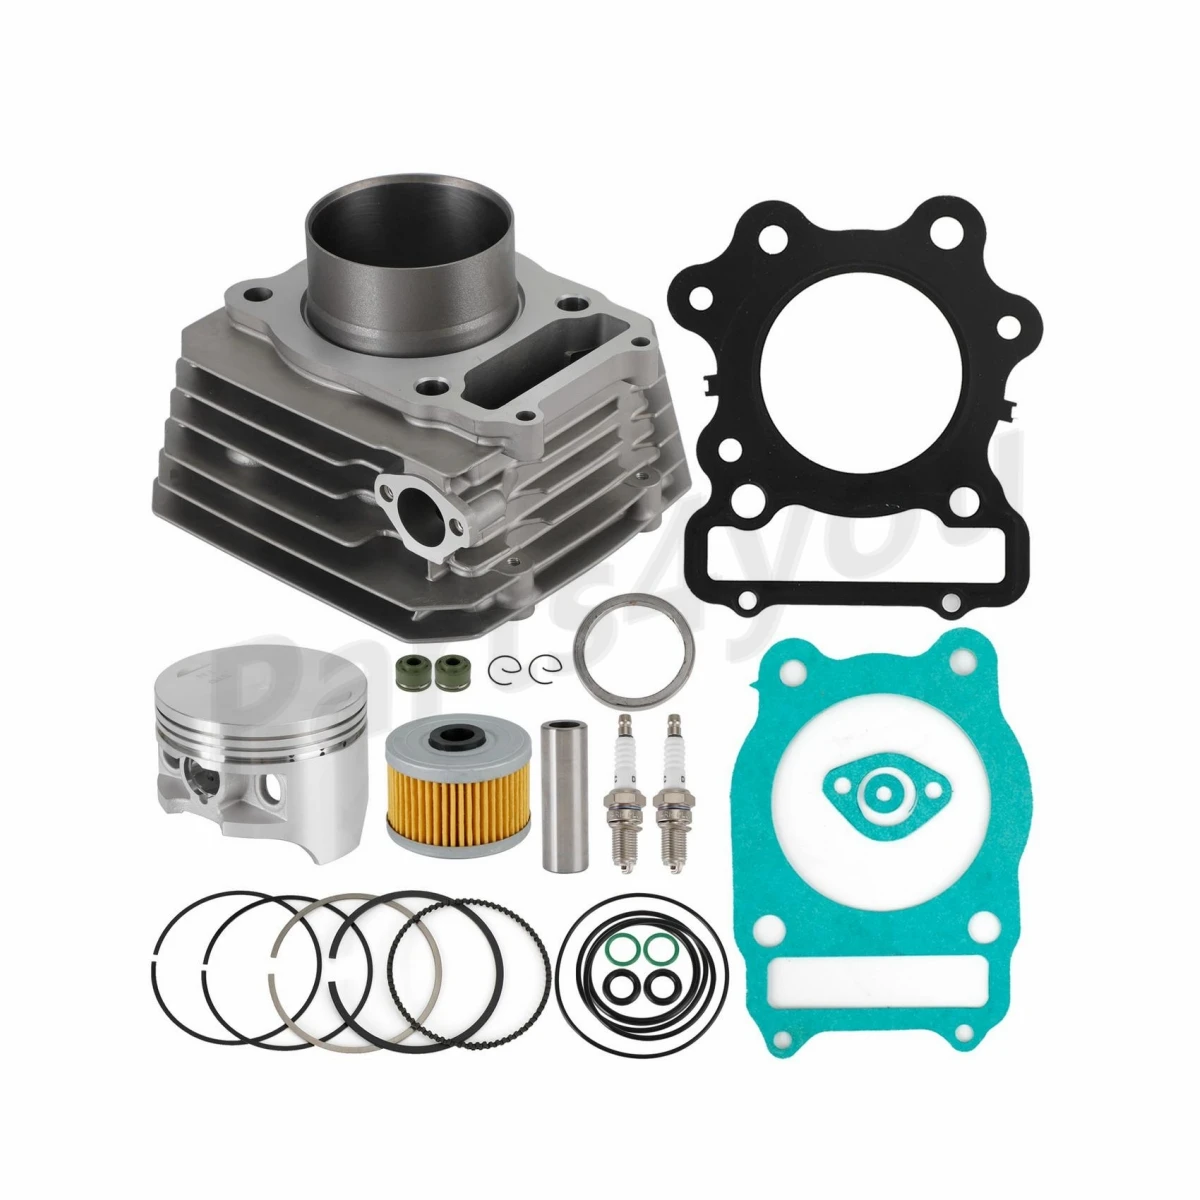 74MM Bore Top End Cylinder Gasket Kit for Honda ATV TRX300 2x4 Fourtrax 300 4X4 TRX300FW 1988-2000 12100-HC4-000 12100HC4000 motorcycle ignition key switch electric door lock for honda fourtrax 300 trx300fw 4x4 trx300 trx 300 2x4 1990 2000 35191 hc4 670